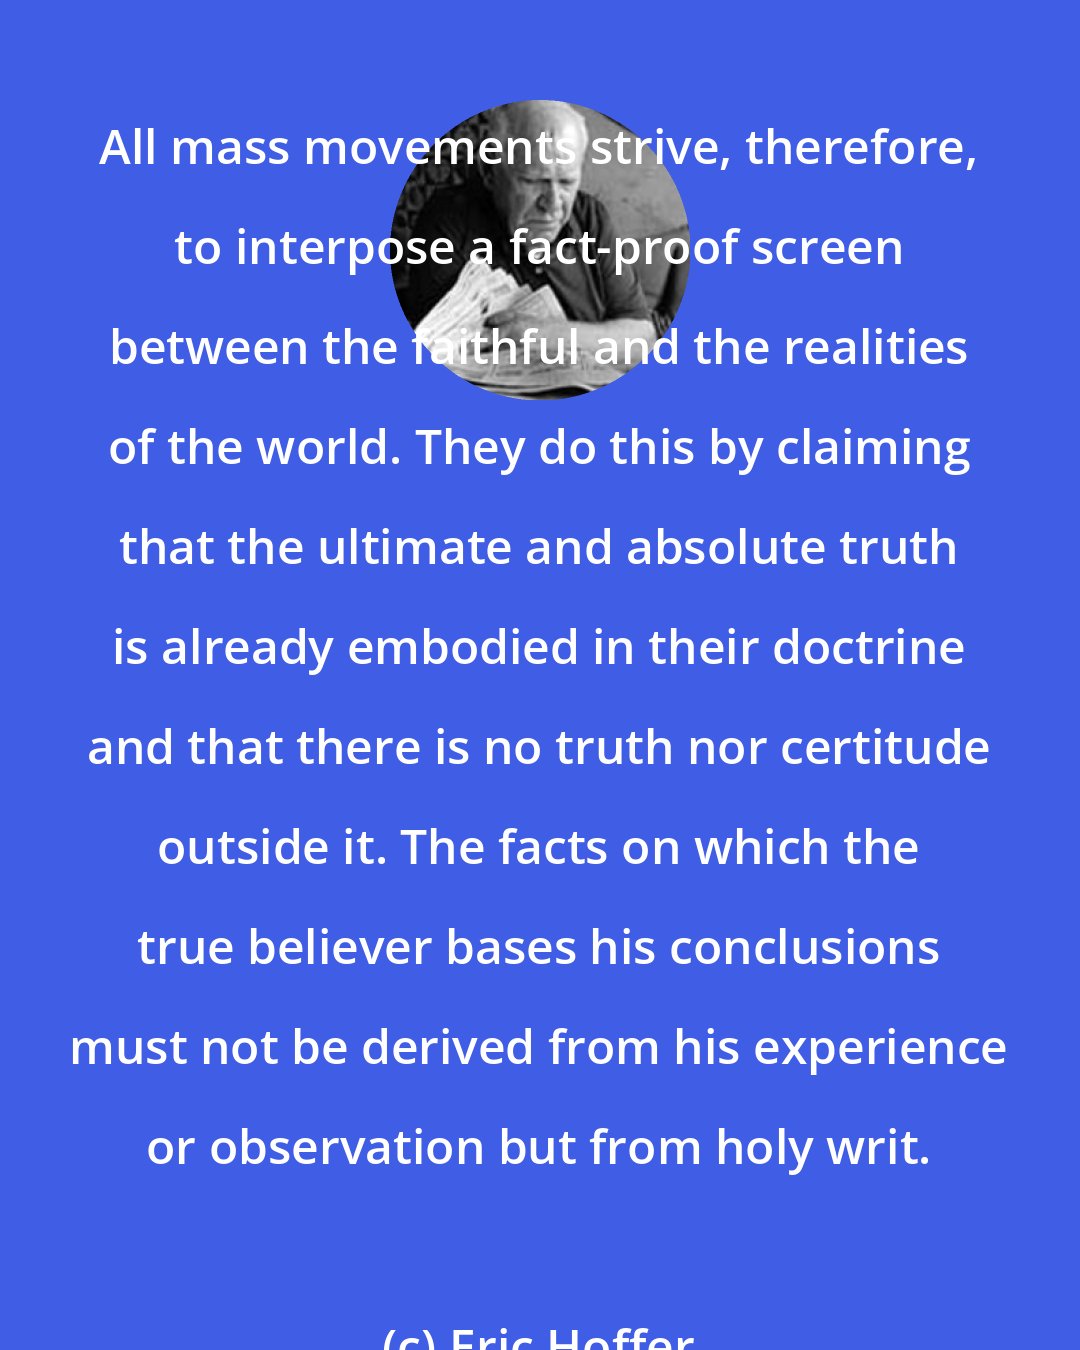 Eric Hoffer: All mass movements strive, therefore, to interpose a fact-proof screen between the faithful and the realities of the world. They do this by claiming that the ultimate and absolute truth is already embodied in their doctrine and that there is no truth nor certitude outside it. The facts on which the true believer bases his conclusions must not be derived from his experience or observation but from holy writ.